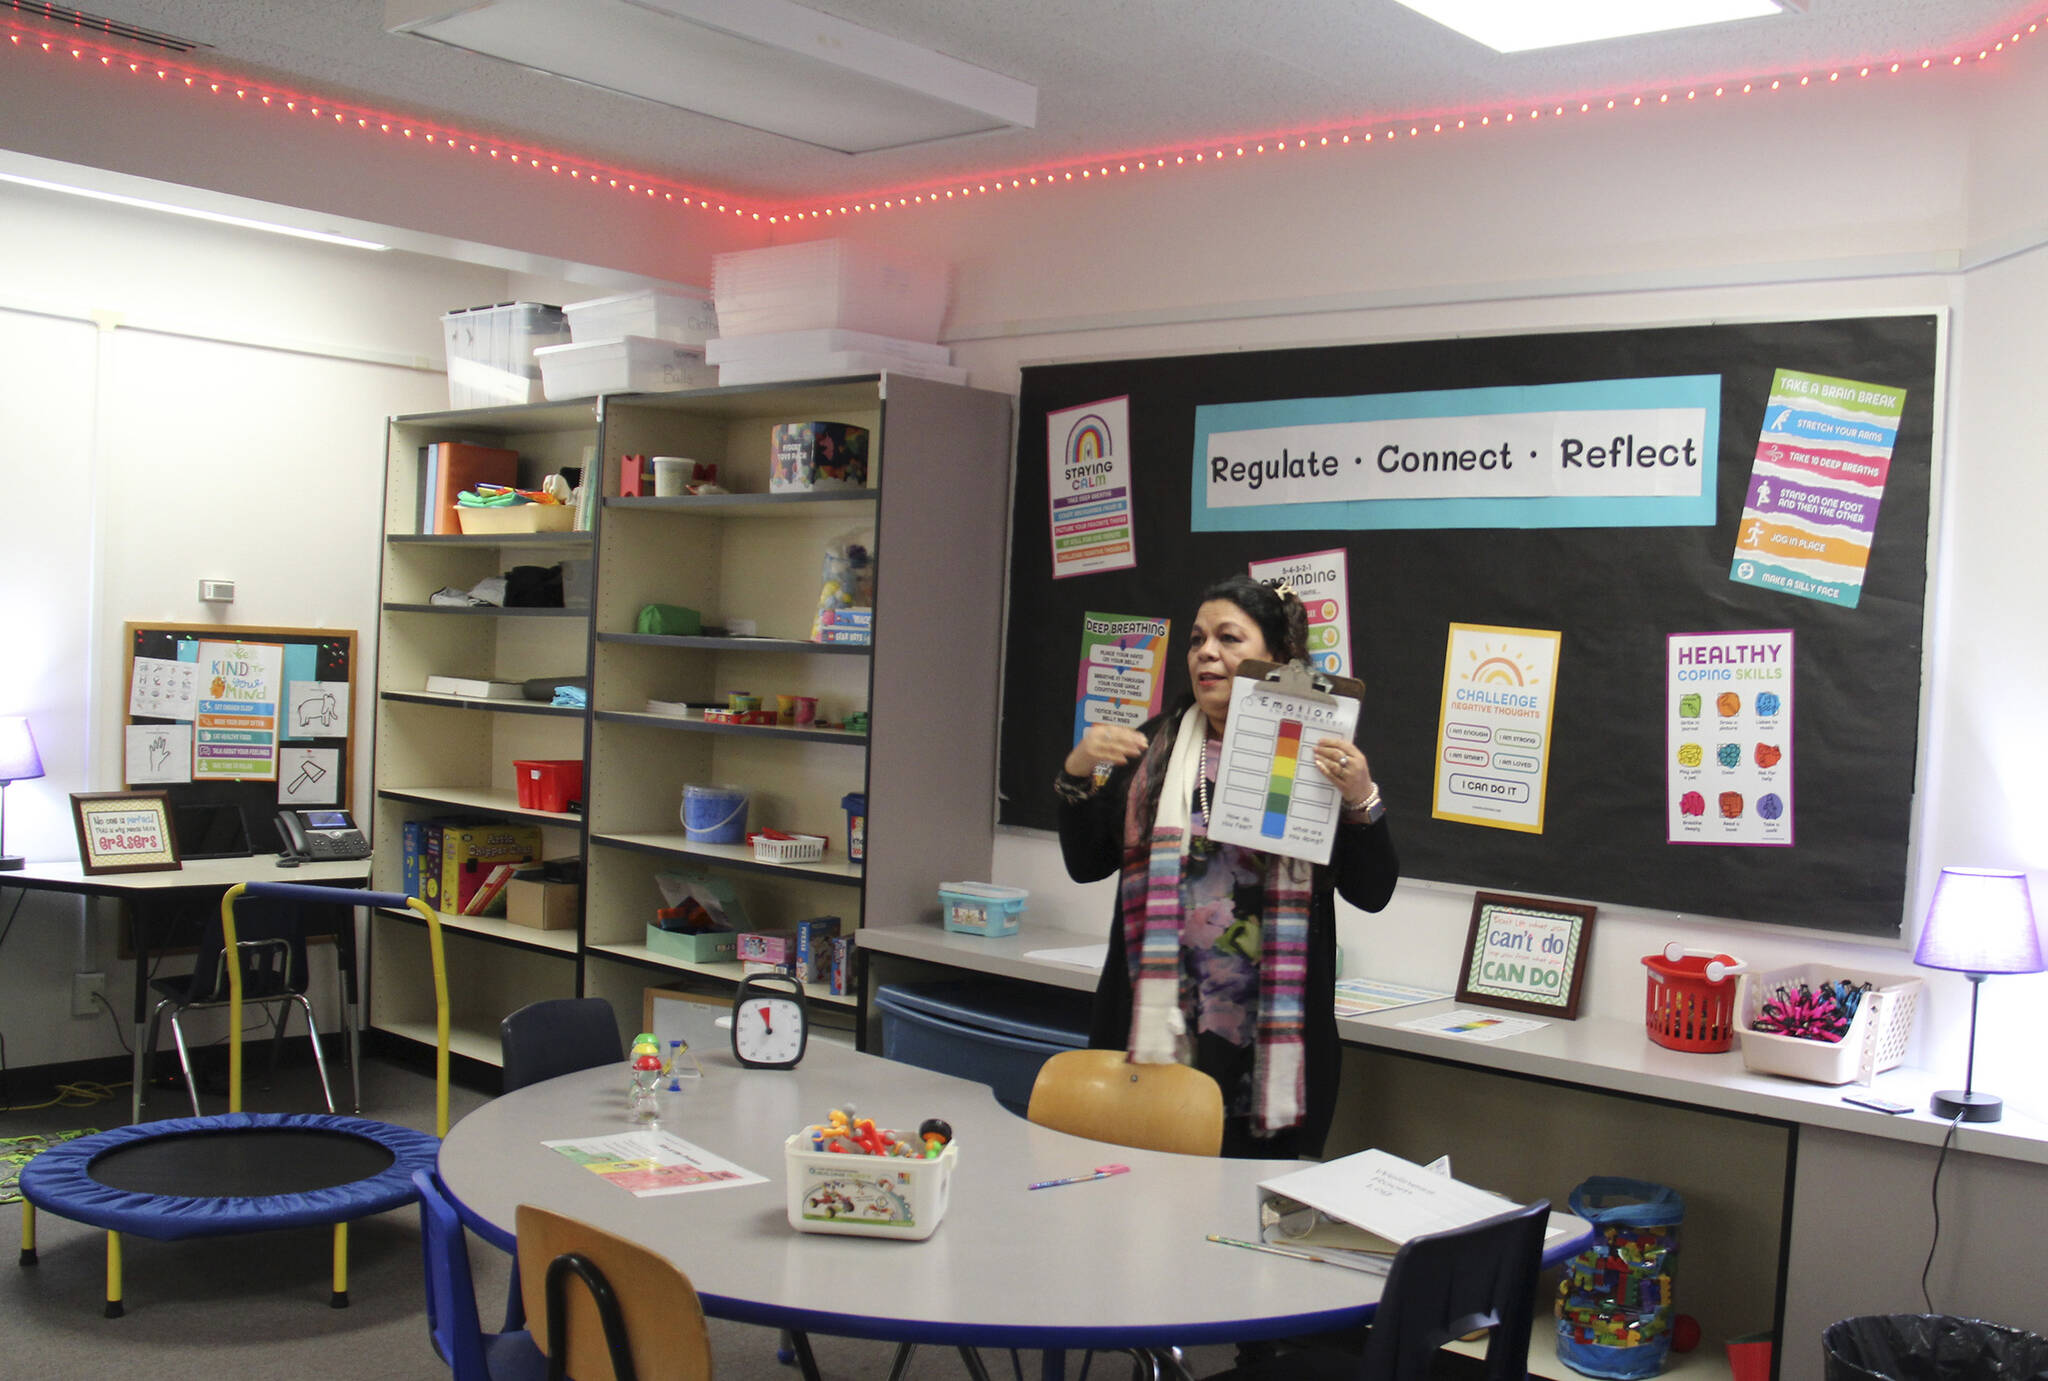 Students can find solace in the Wellness Room as Thackeray showcases tools for emotional regulation, fostering connection and reflection amidst a calming atmosphere.